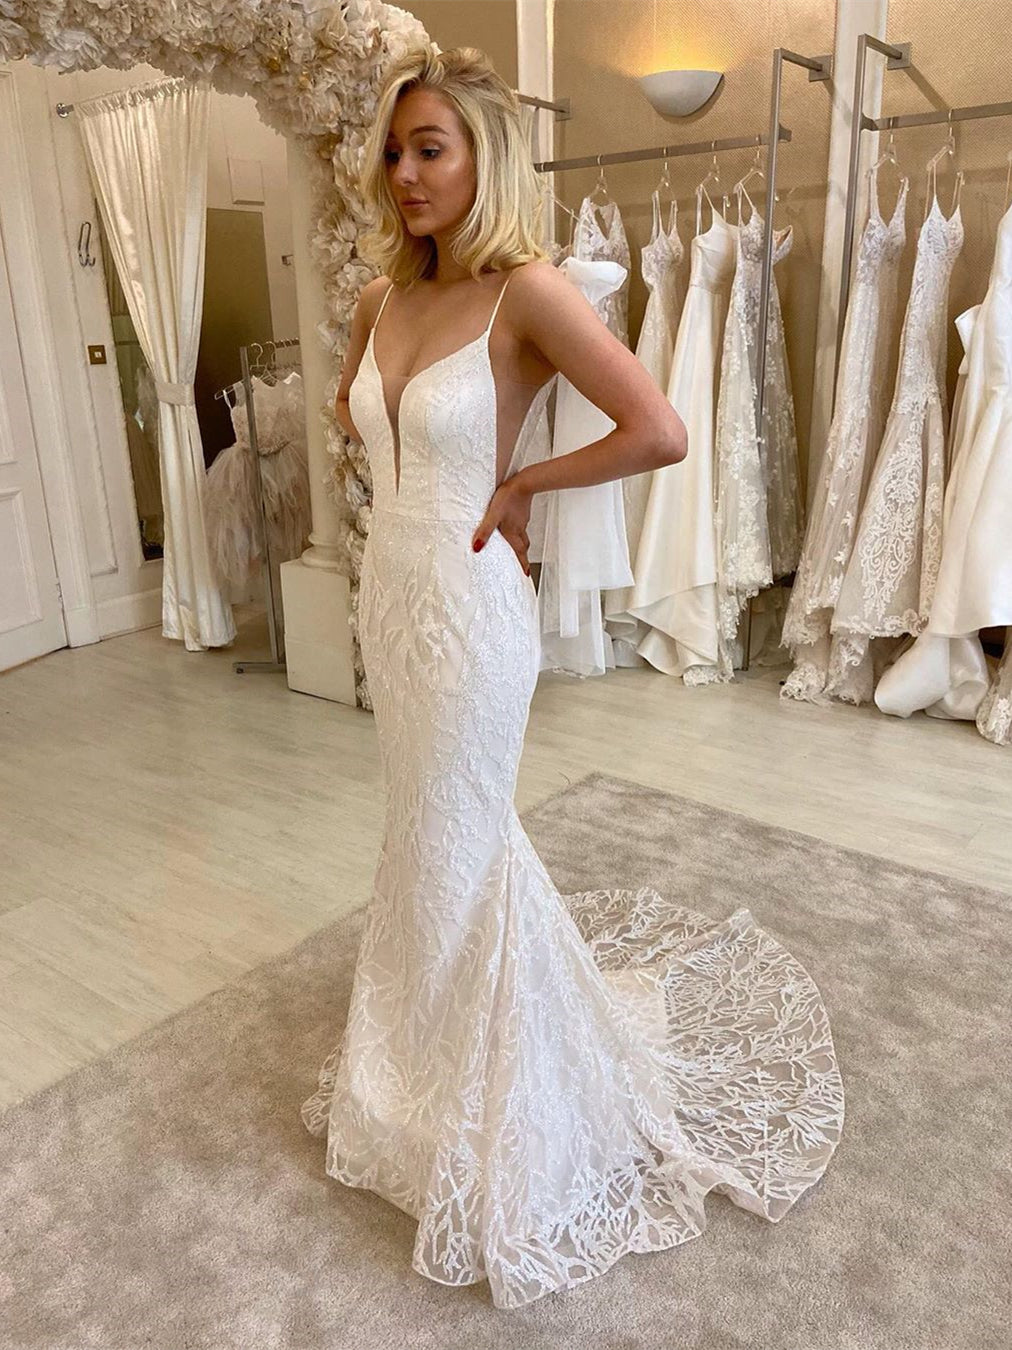 2 Pieces Spaghetti Long Mermaid Sequin lace Wedding Dresses, 2020 Newest Wedding Dresses, Bridal Gown